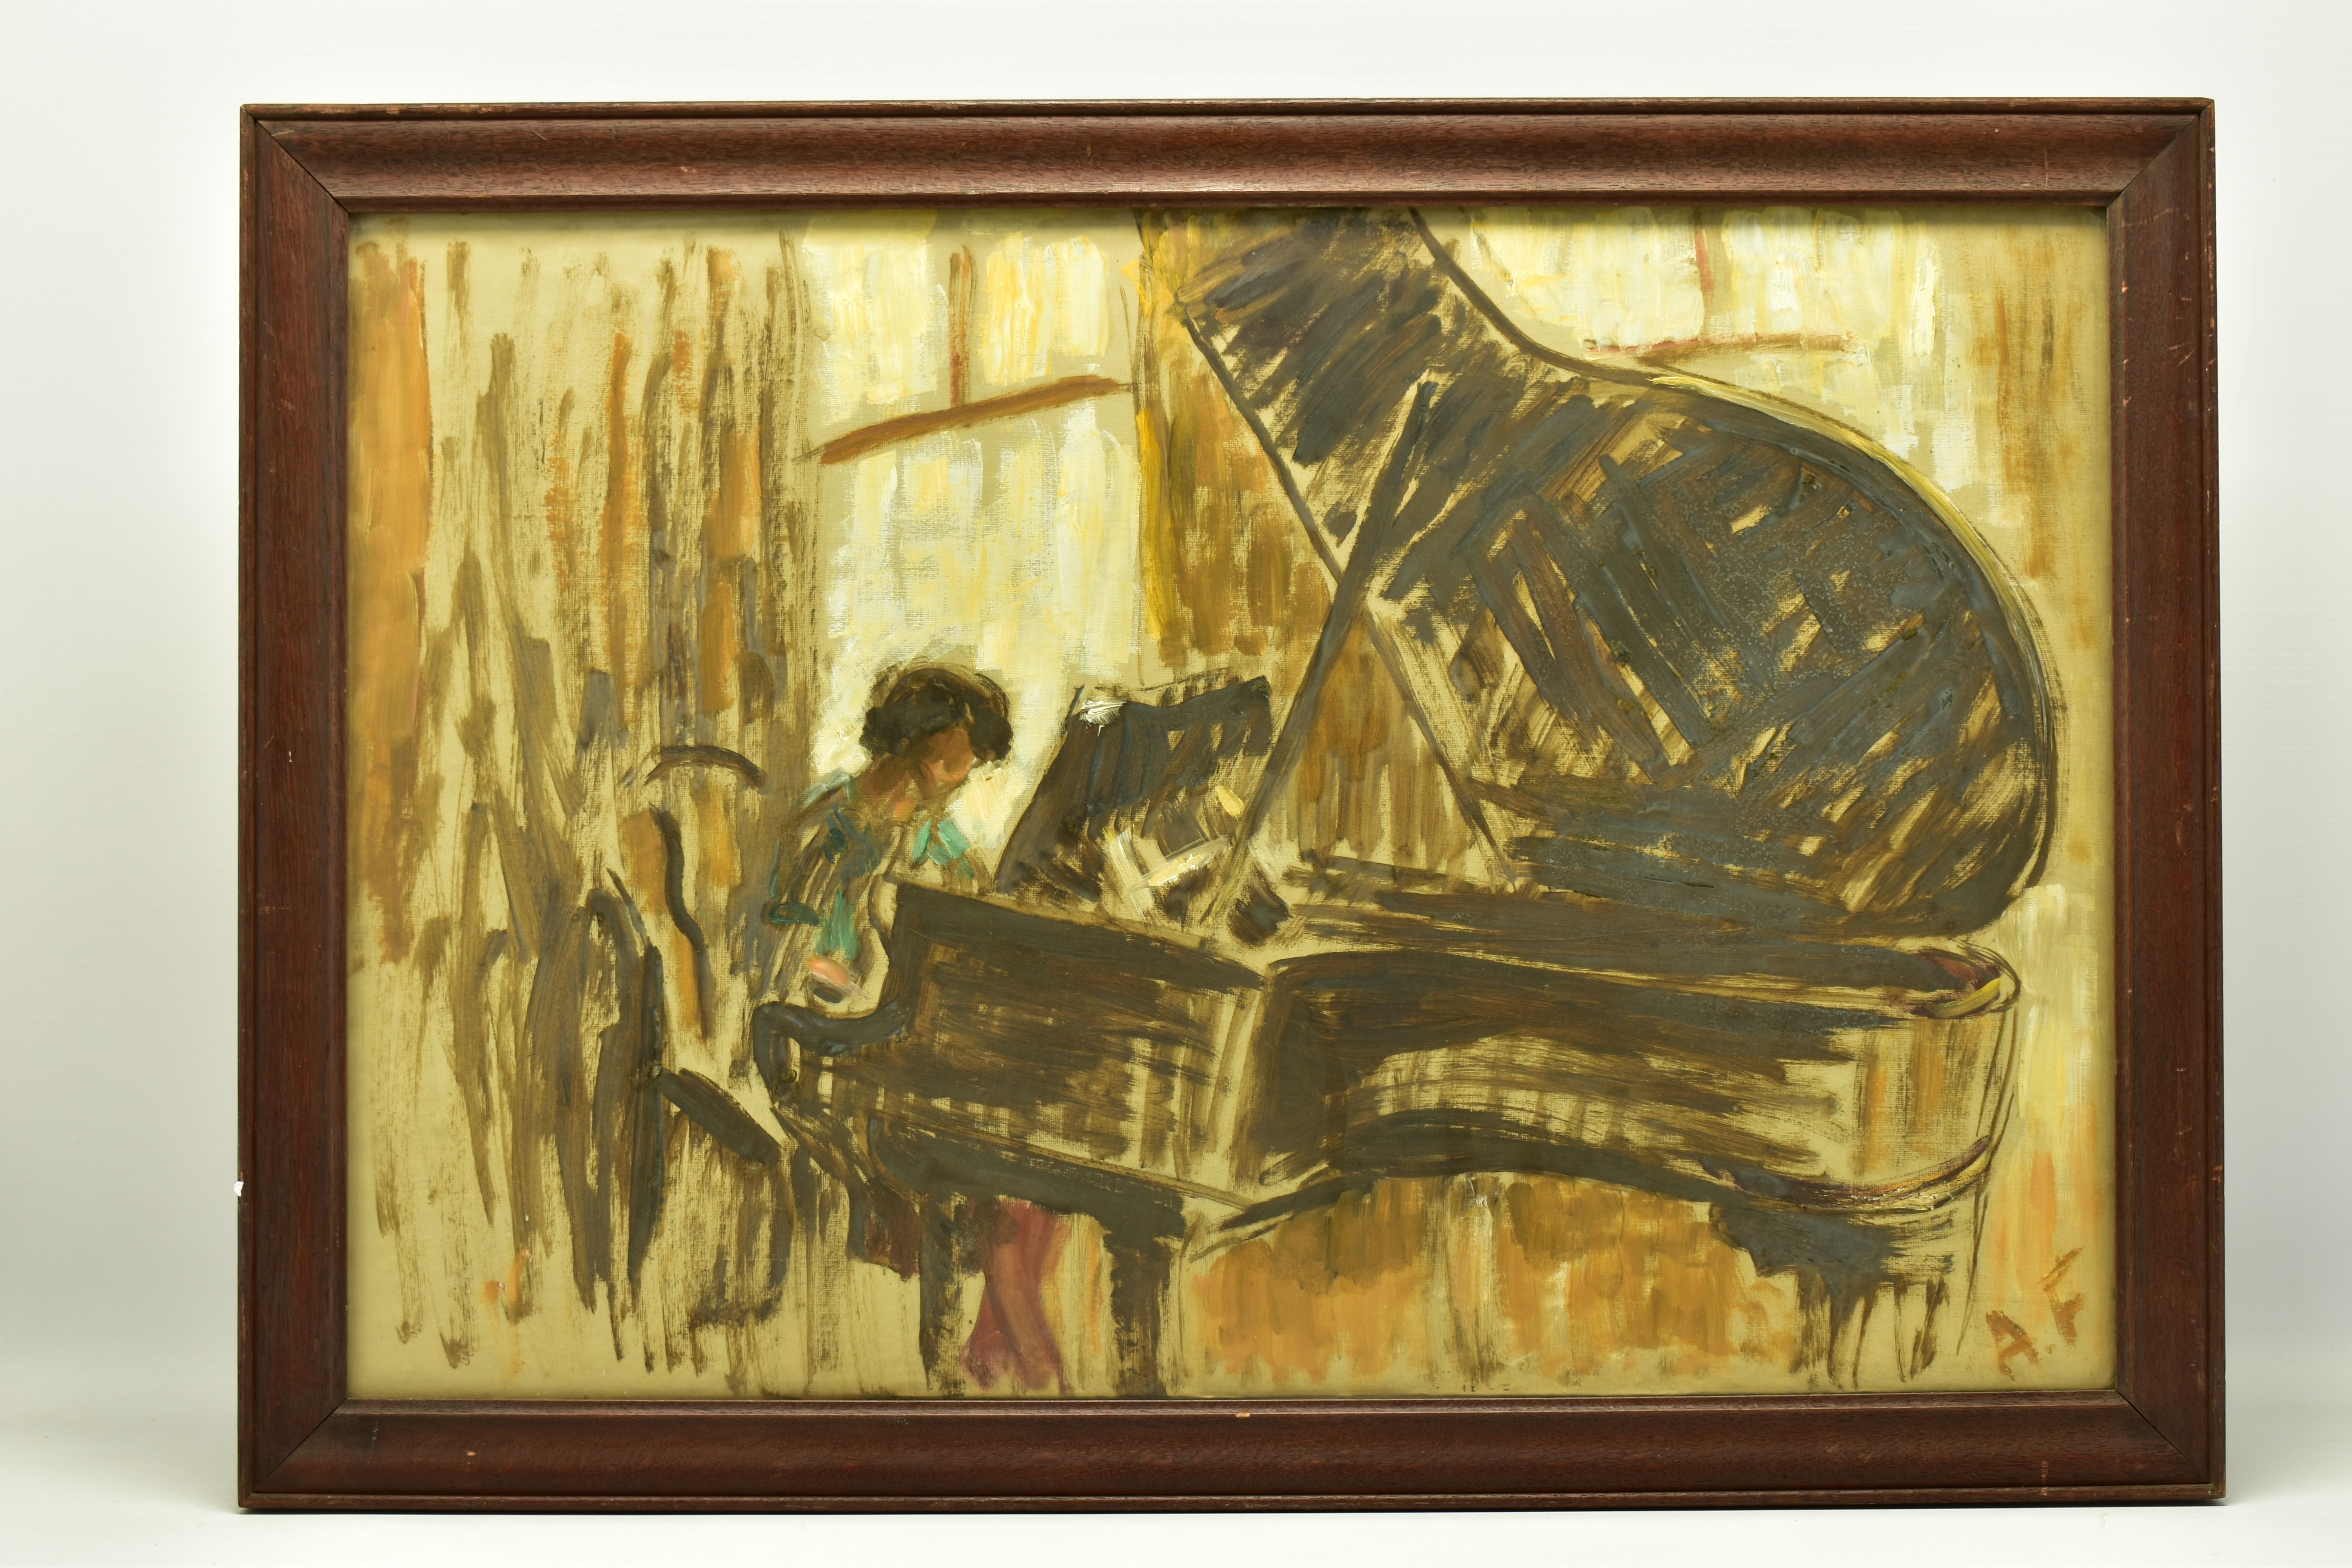 AMY FLATTO (20TH CENTURY) 'GIRL AT THE PIANO', a study of a female figure playing a Grand Piano,